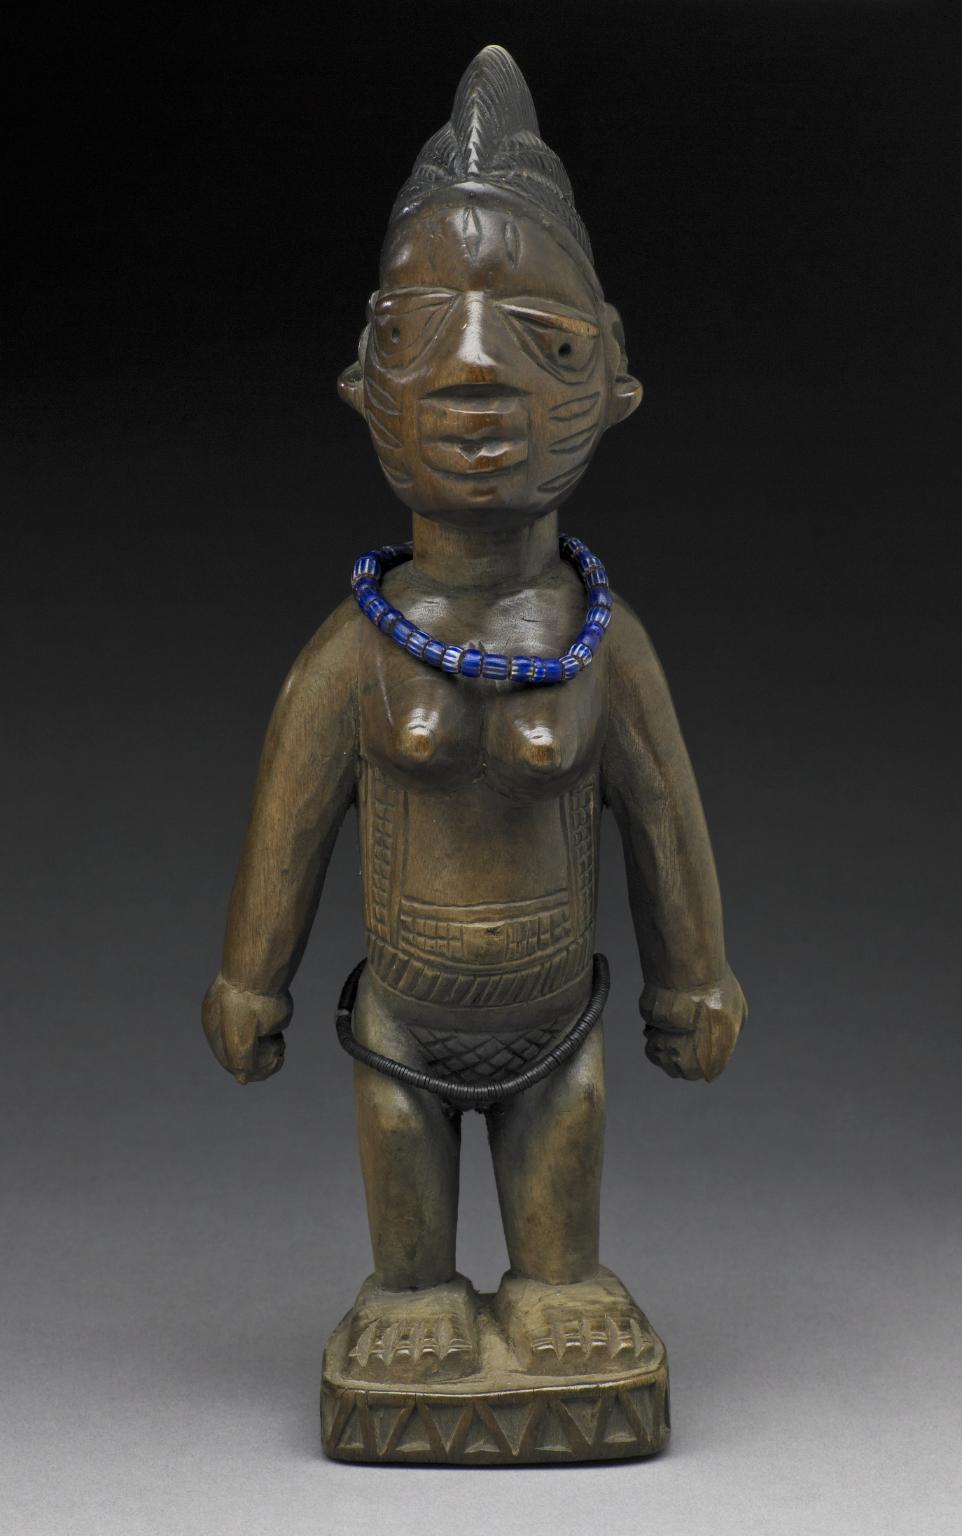 Anthony White, The Trouble with Twins: Image and Ritual of the Yorube ère ìbejì Fig. 4. Unknown Yoruba artist (Nigeria), Female twin figure (ère ìbejì), date unknown.